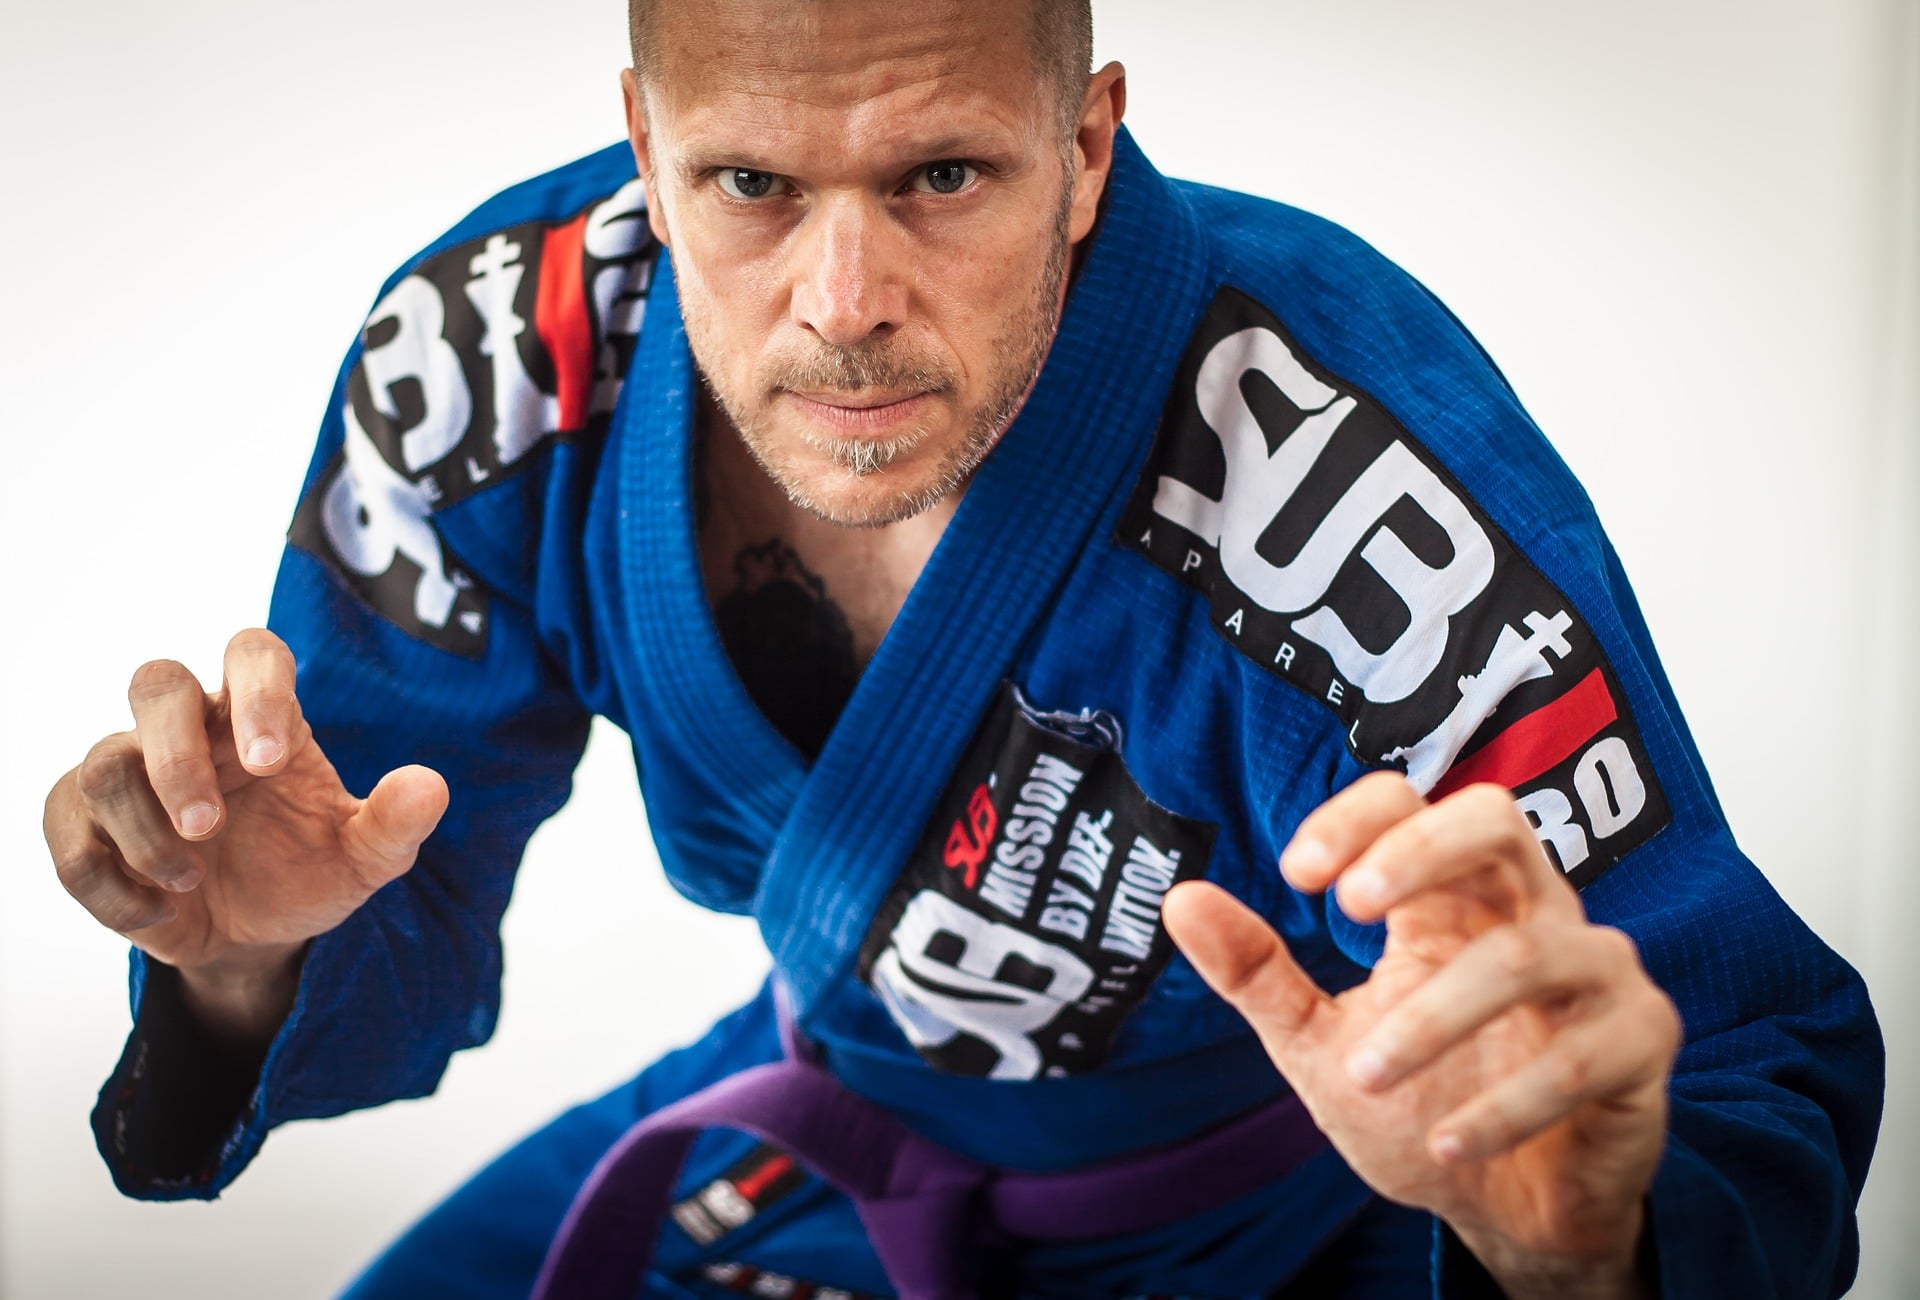 What Does it Take to Get a Blue Belt in BJJ? - The MMA Guru